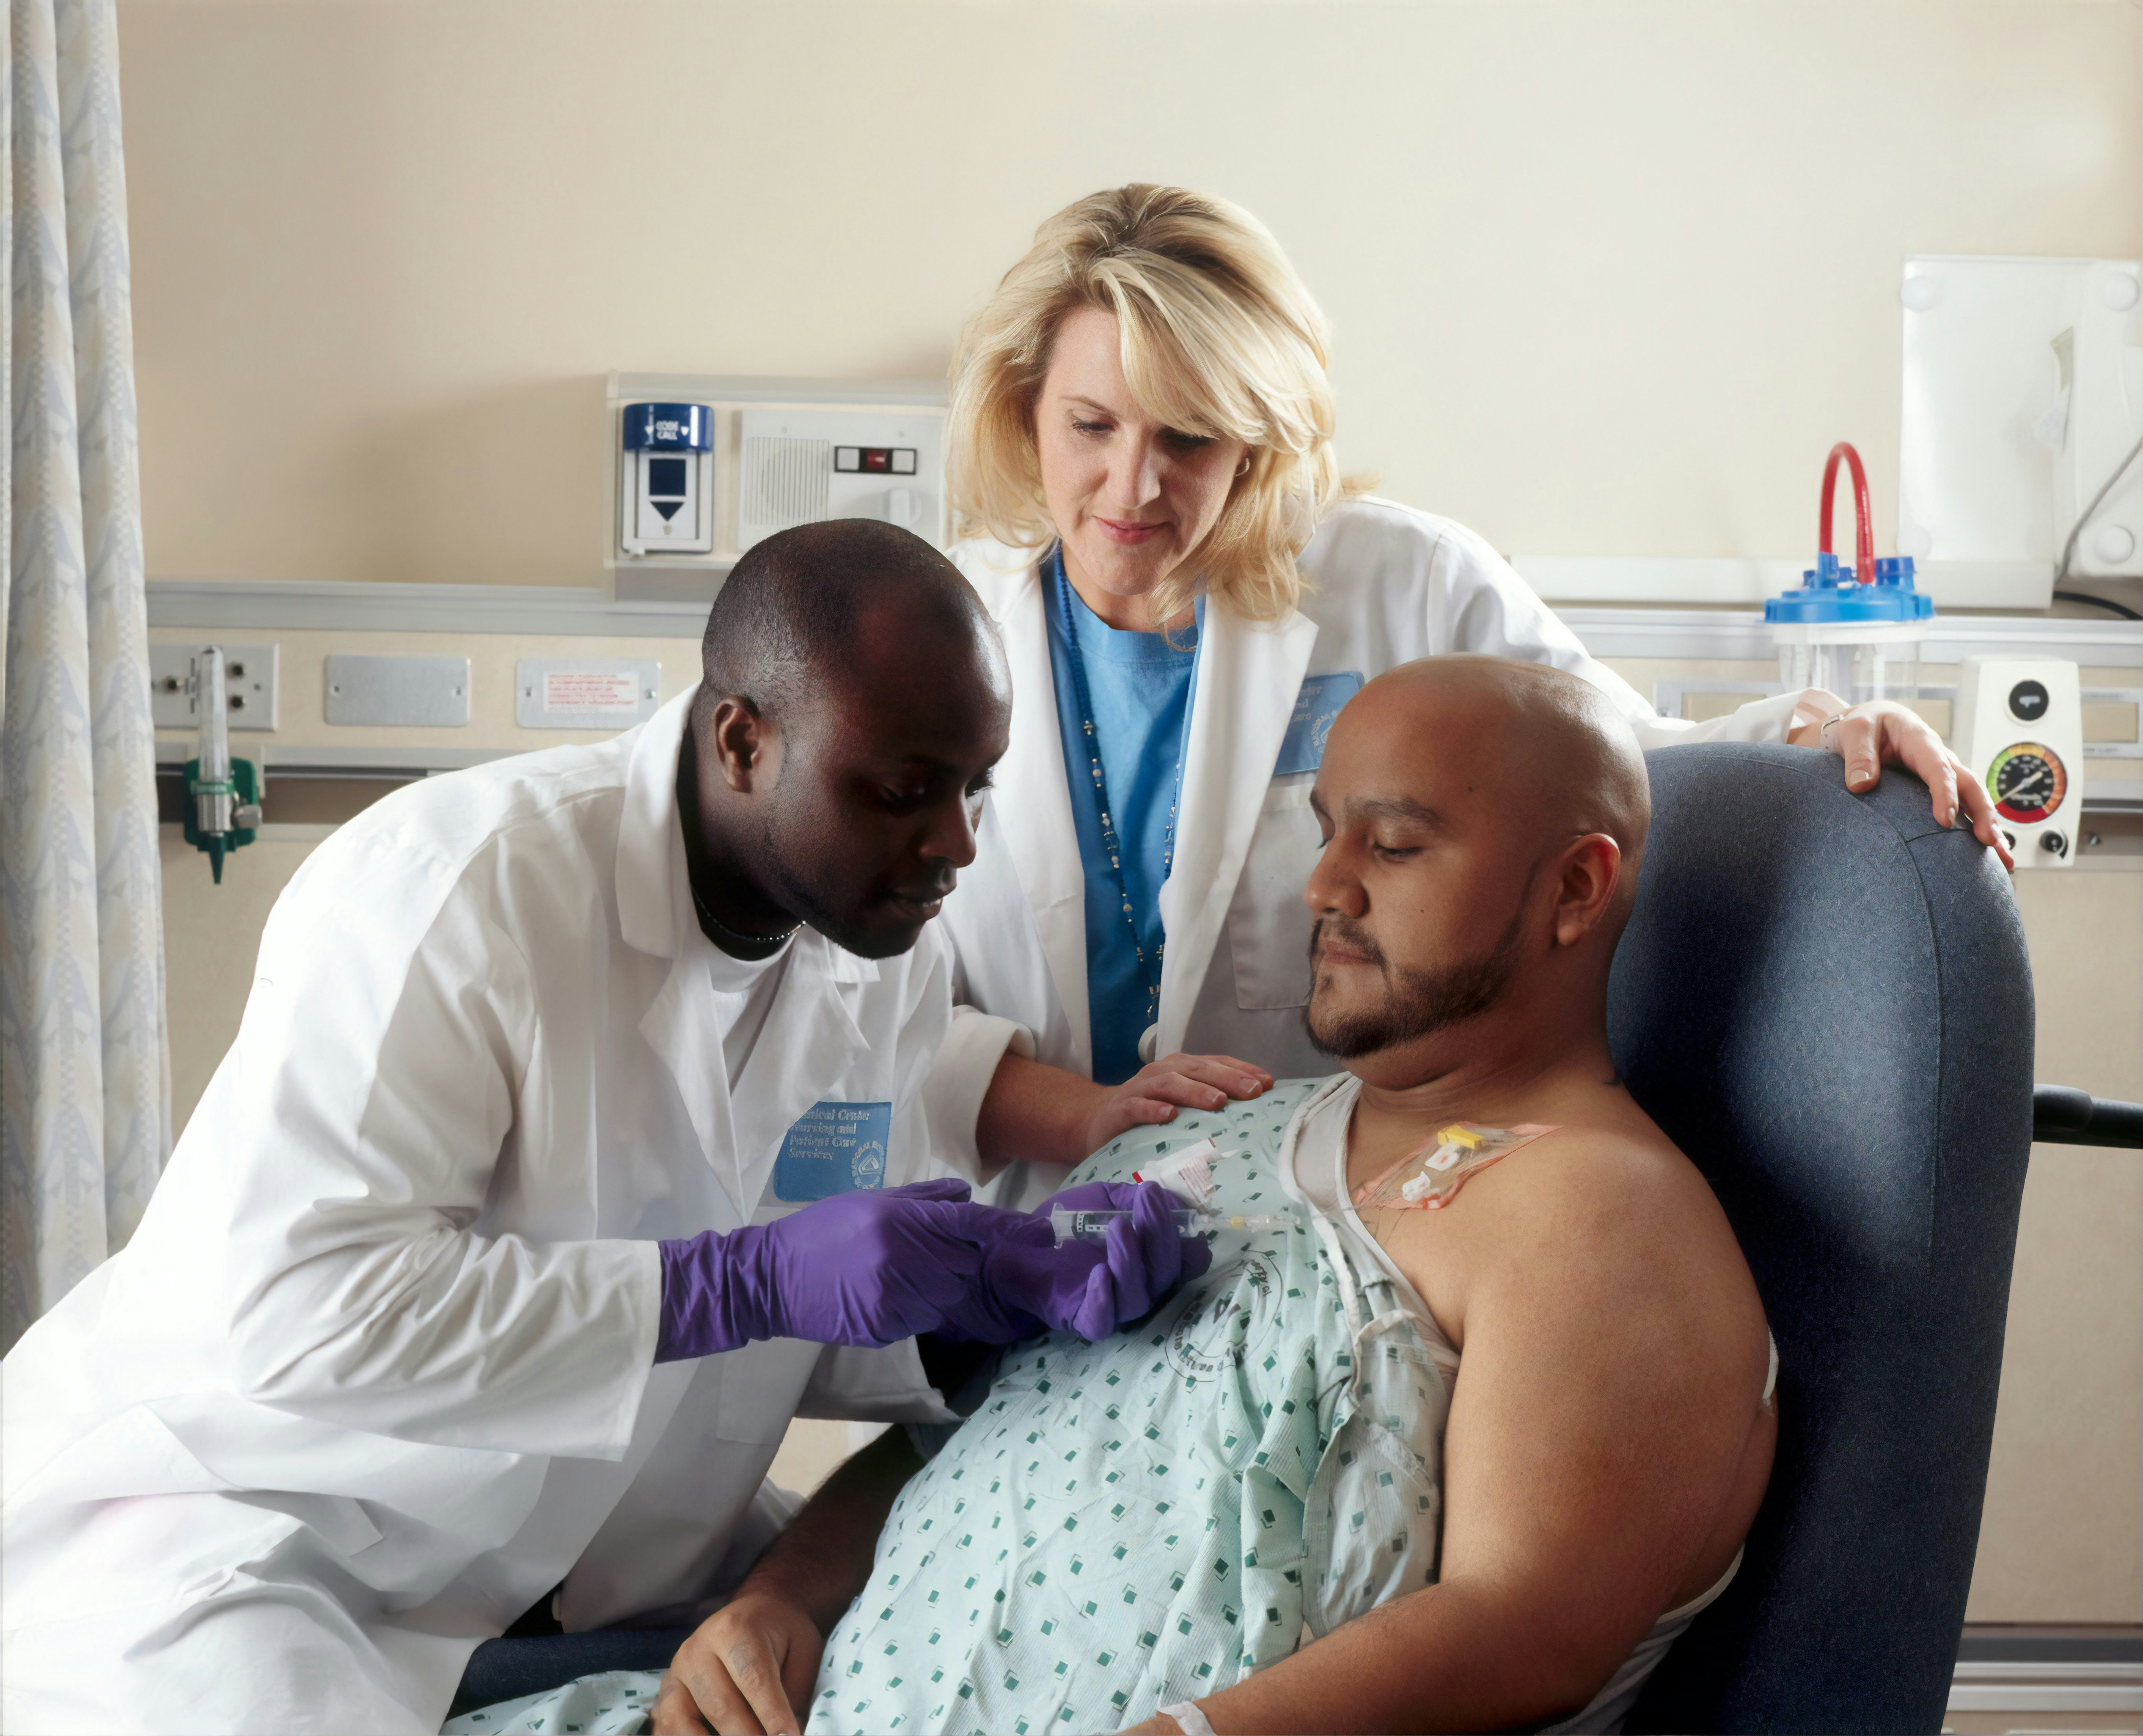 A Hispanic male patient receives Chemotherapy from a African-American Nurse through a port that is placed in his chest area. A caucasian female nurse looks on. 2010